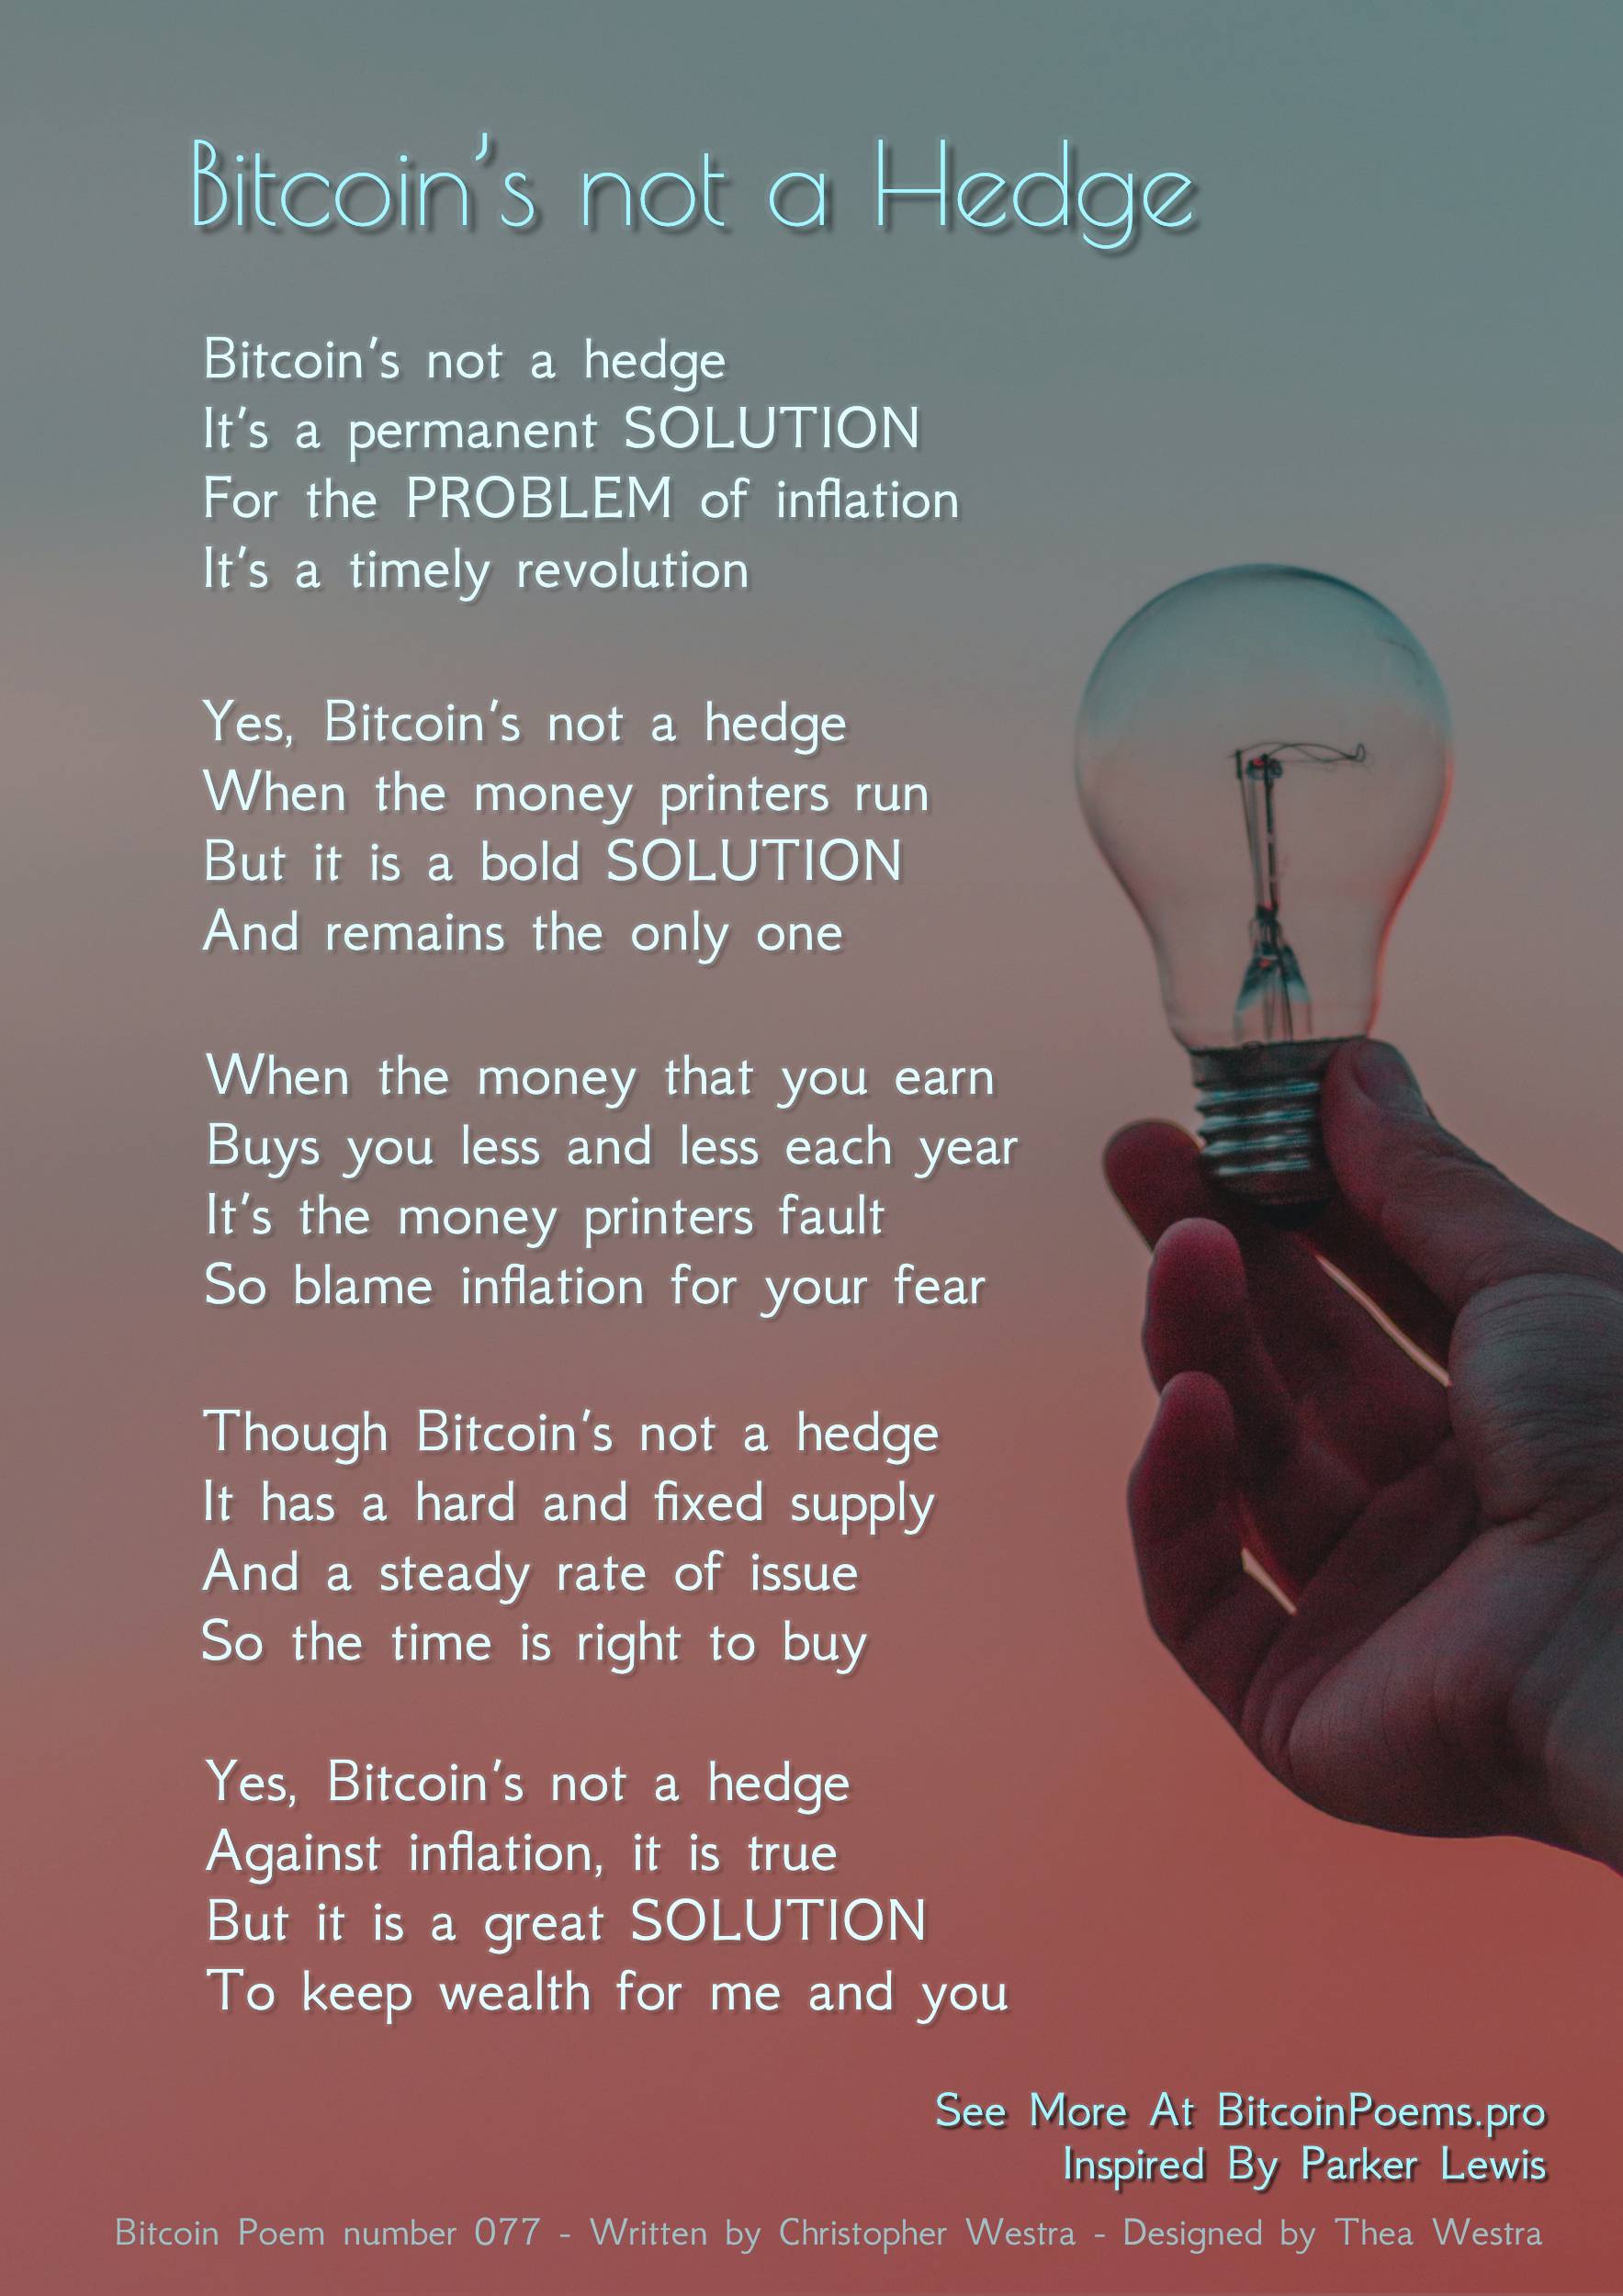 Bitcoin's Not A Hedge - Bitcoin Poem 077 by Christopher Westra